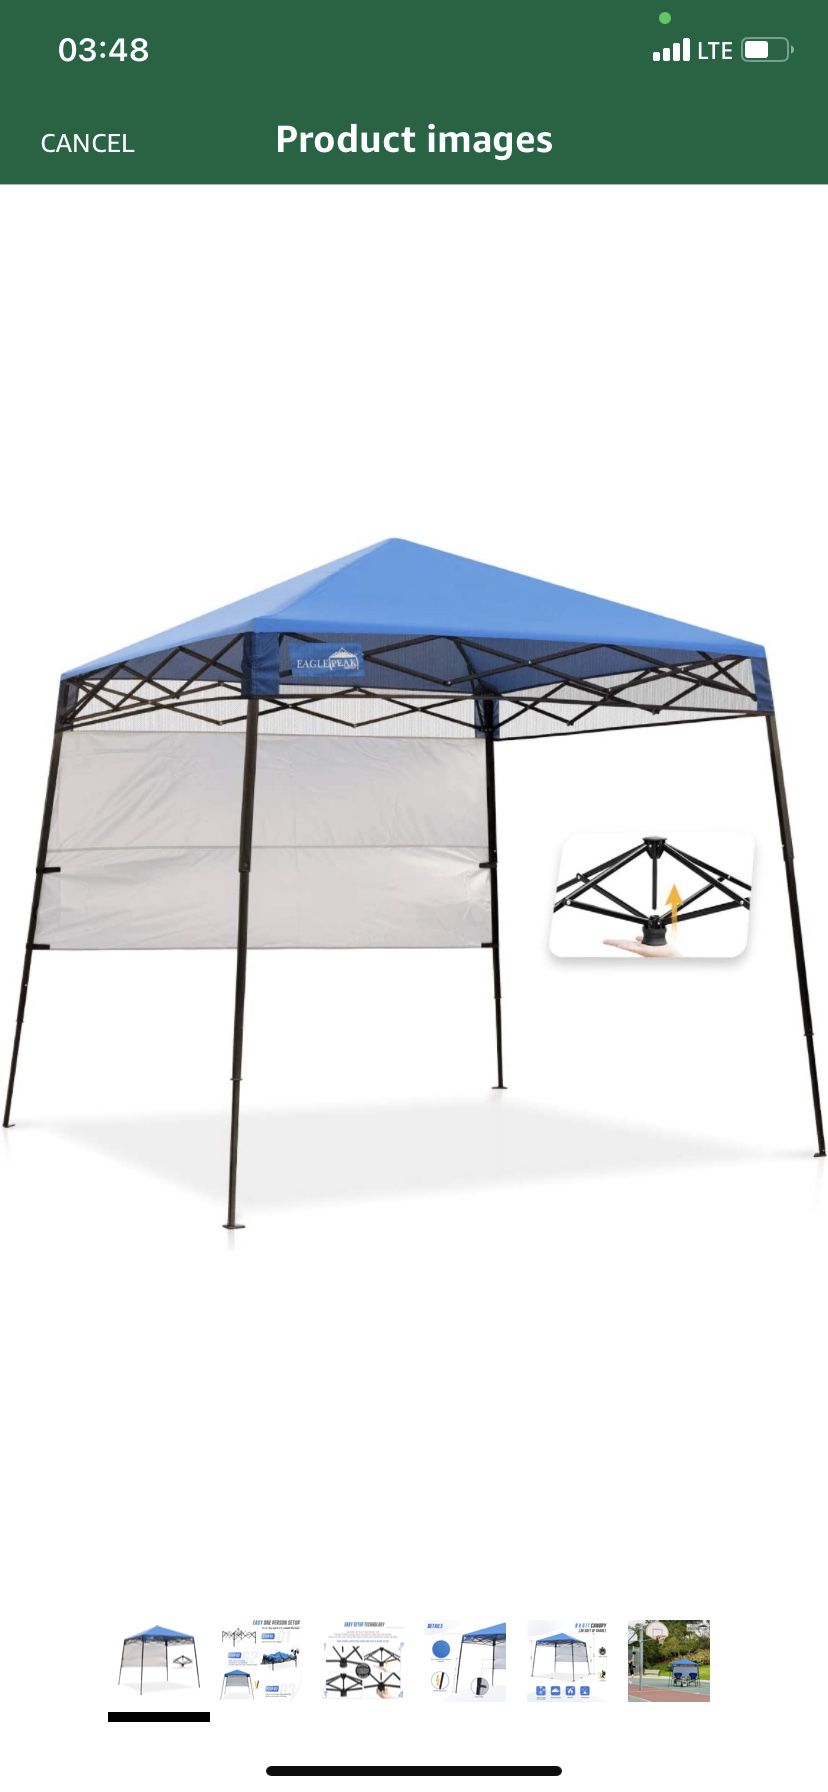  Tripper 8' x 8' Slant Leg Lightweight Compact Portable Canopy w/Backpack Easy One Person Set-up Folding Shelter 6' x 6' Top and 8' x 8' Base (Blue)